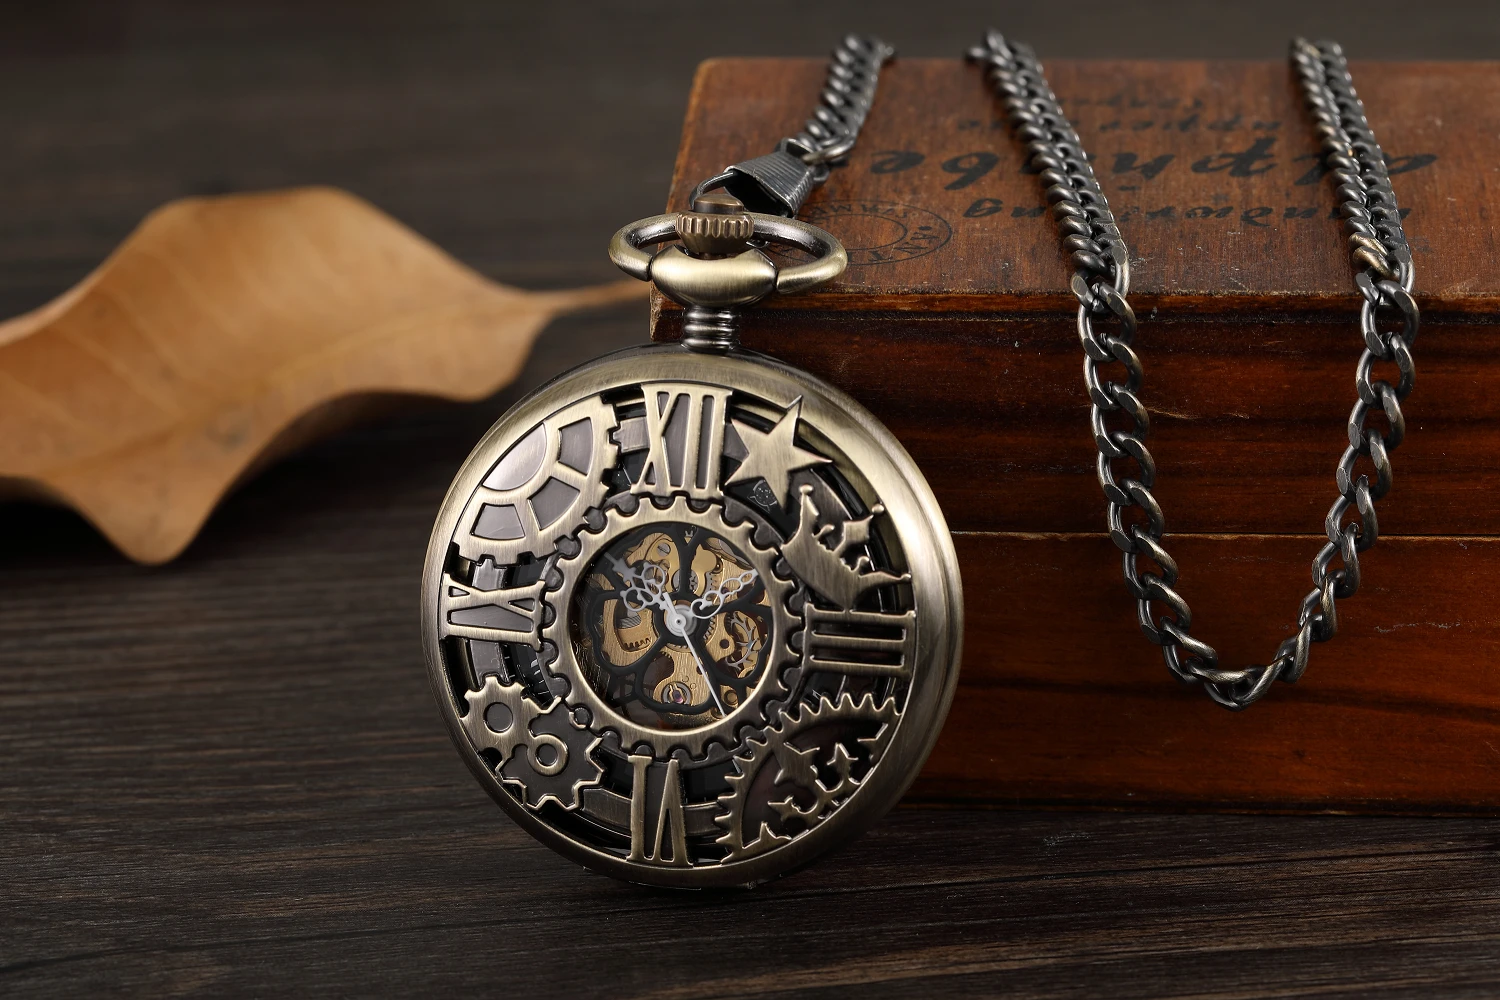 Retro Luxury Pocket Watch Vintage Hand-WInd Mechanical Steampunk Men Watches Roman Numerals Clock With Fob Chain Reloj Hombre classic silver pocket watch men fob watches clock roman number hunter hand wind mechanical relogio de bolso with clip long chain